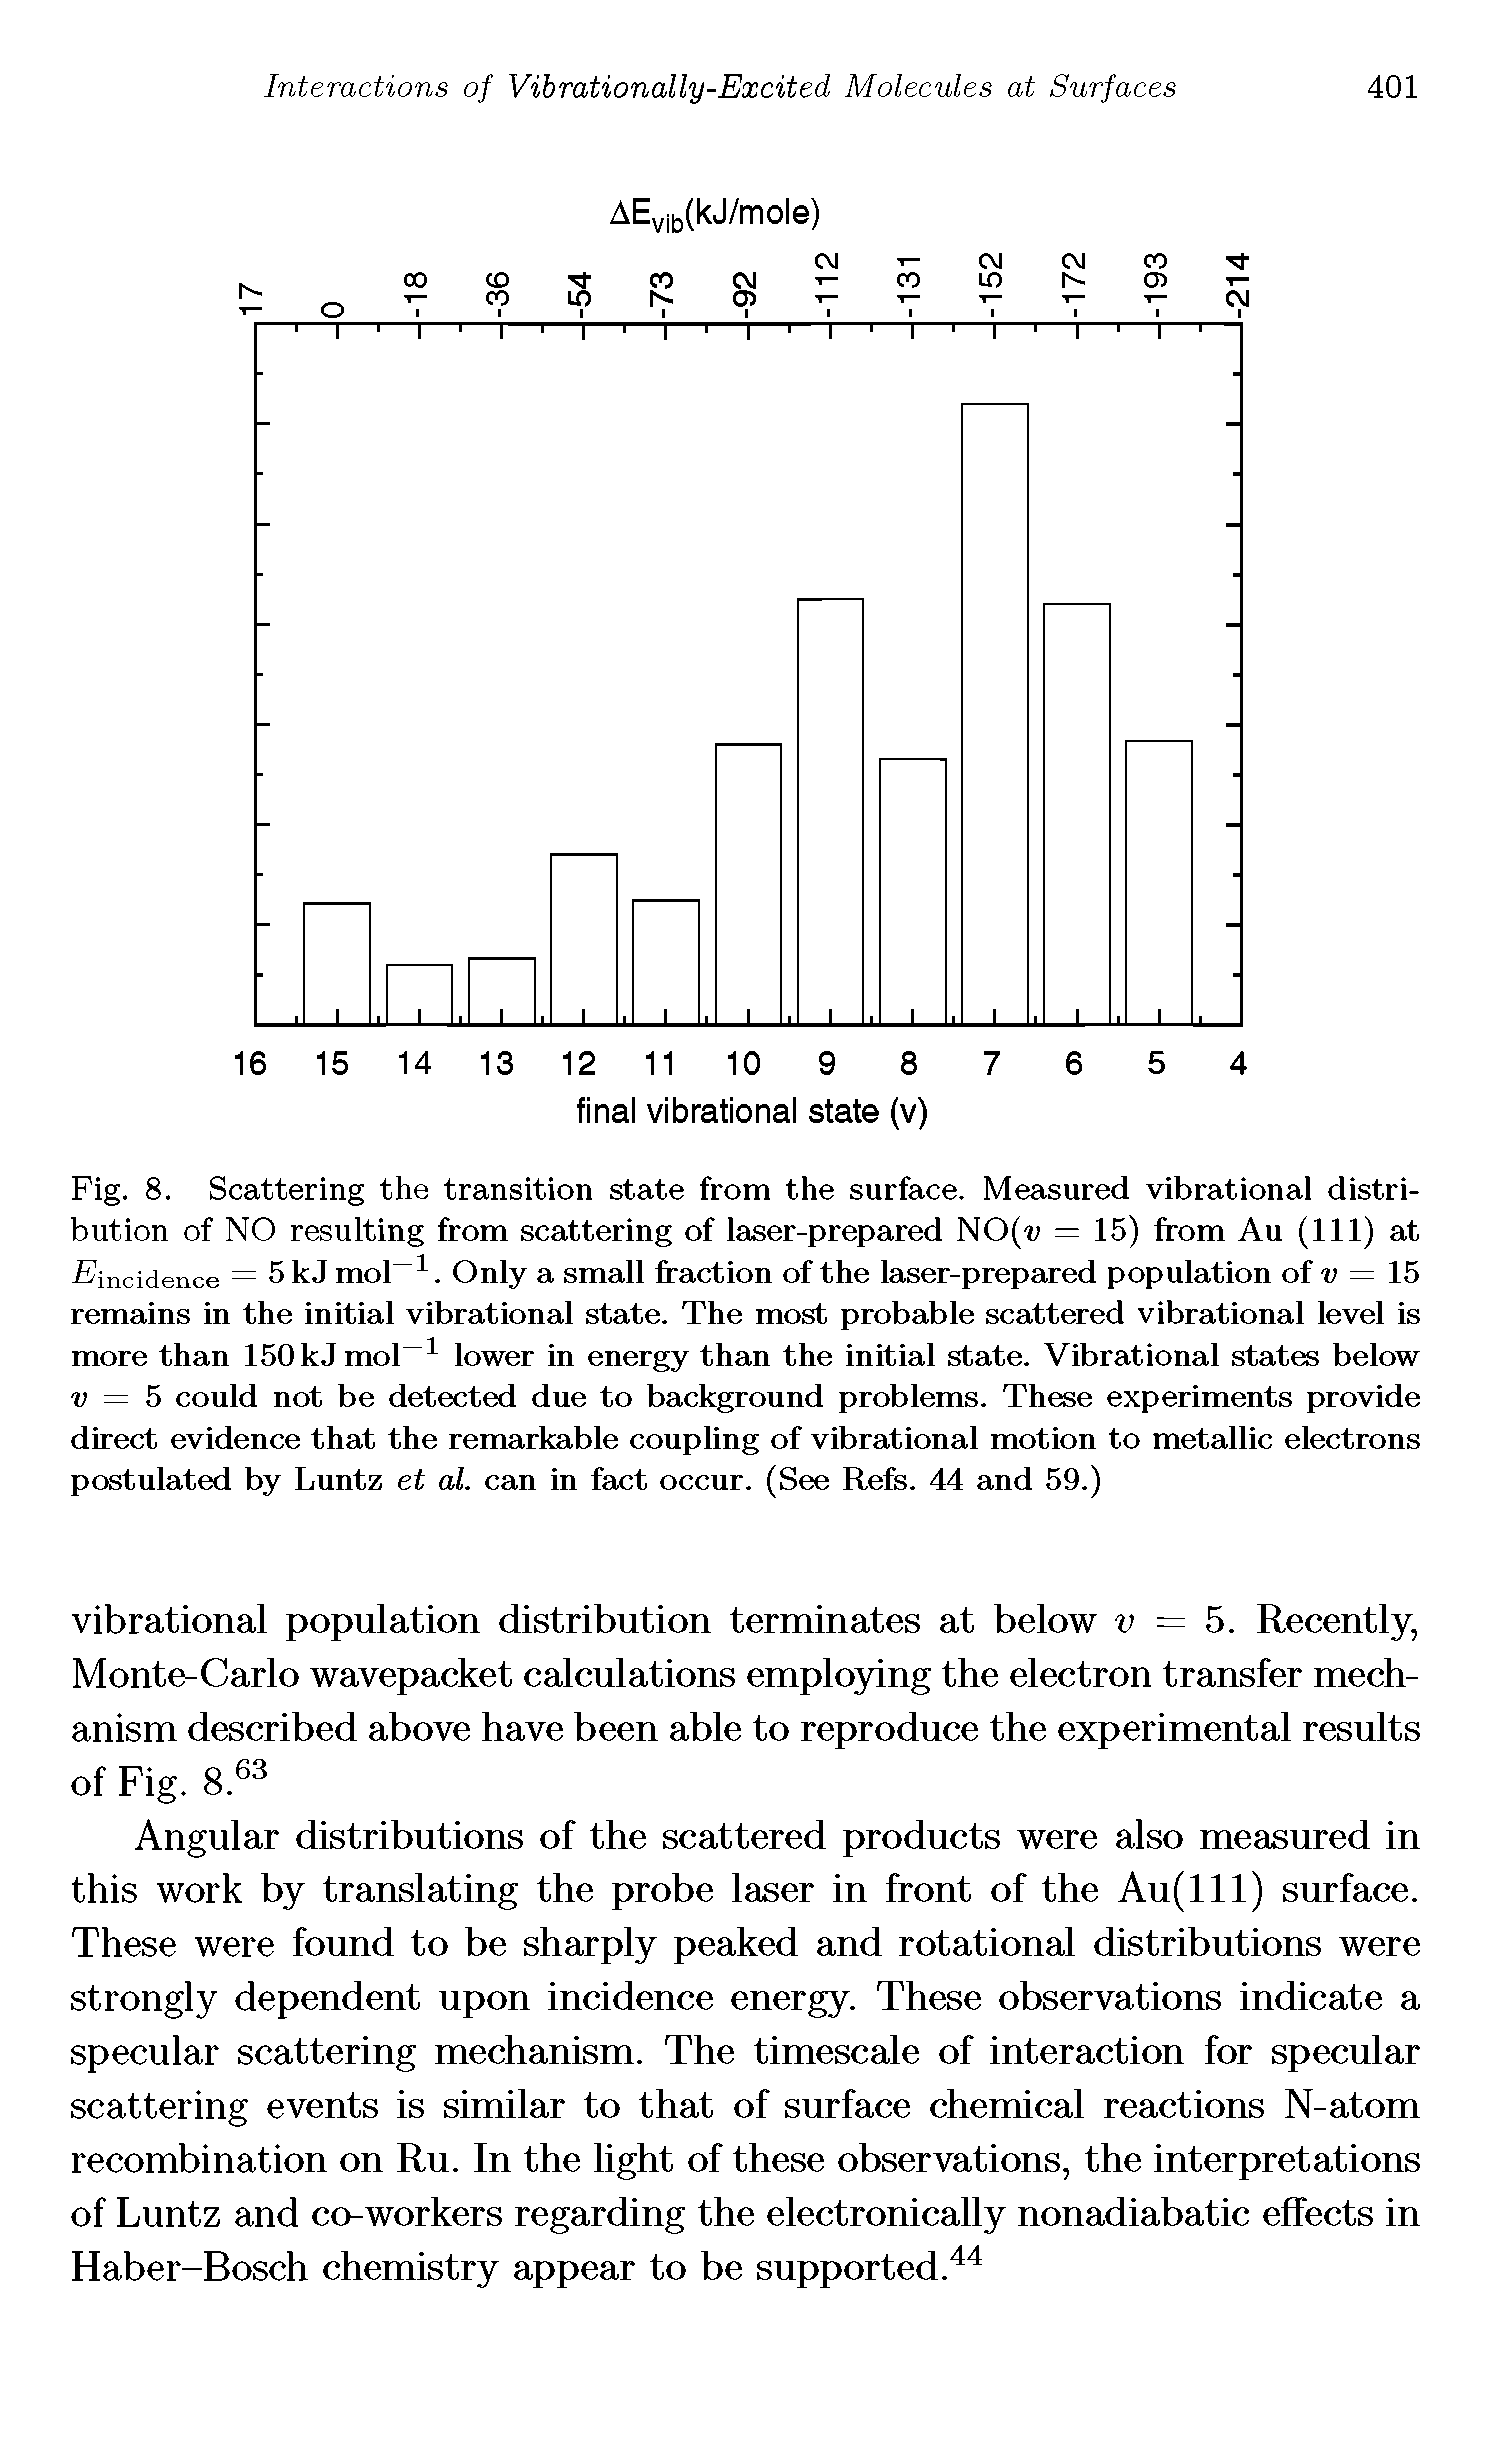 Fig. 8. Scattering the transition state from the surface. Measured vibrational distribution of NO resulting from scattering of laser-prepared NO(v = 15) from Au (111) at incidence = 5 kJ mol-1. Only a small fraction of the laser-prepared population of v = 15 remains in the initial vibrational state. The most probable scattered vibrational level is more than 150 kJ mol-1 lower in energy than the initial state. Vibrational states below v = 5 could not be detected due to background problems. These experiments provide direct evidence that the remarkable coupling of vibrational motion to metallic electrons postulated by Luntz et al. can in fact occur. (See Refs. 44 and 59.)...